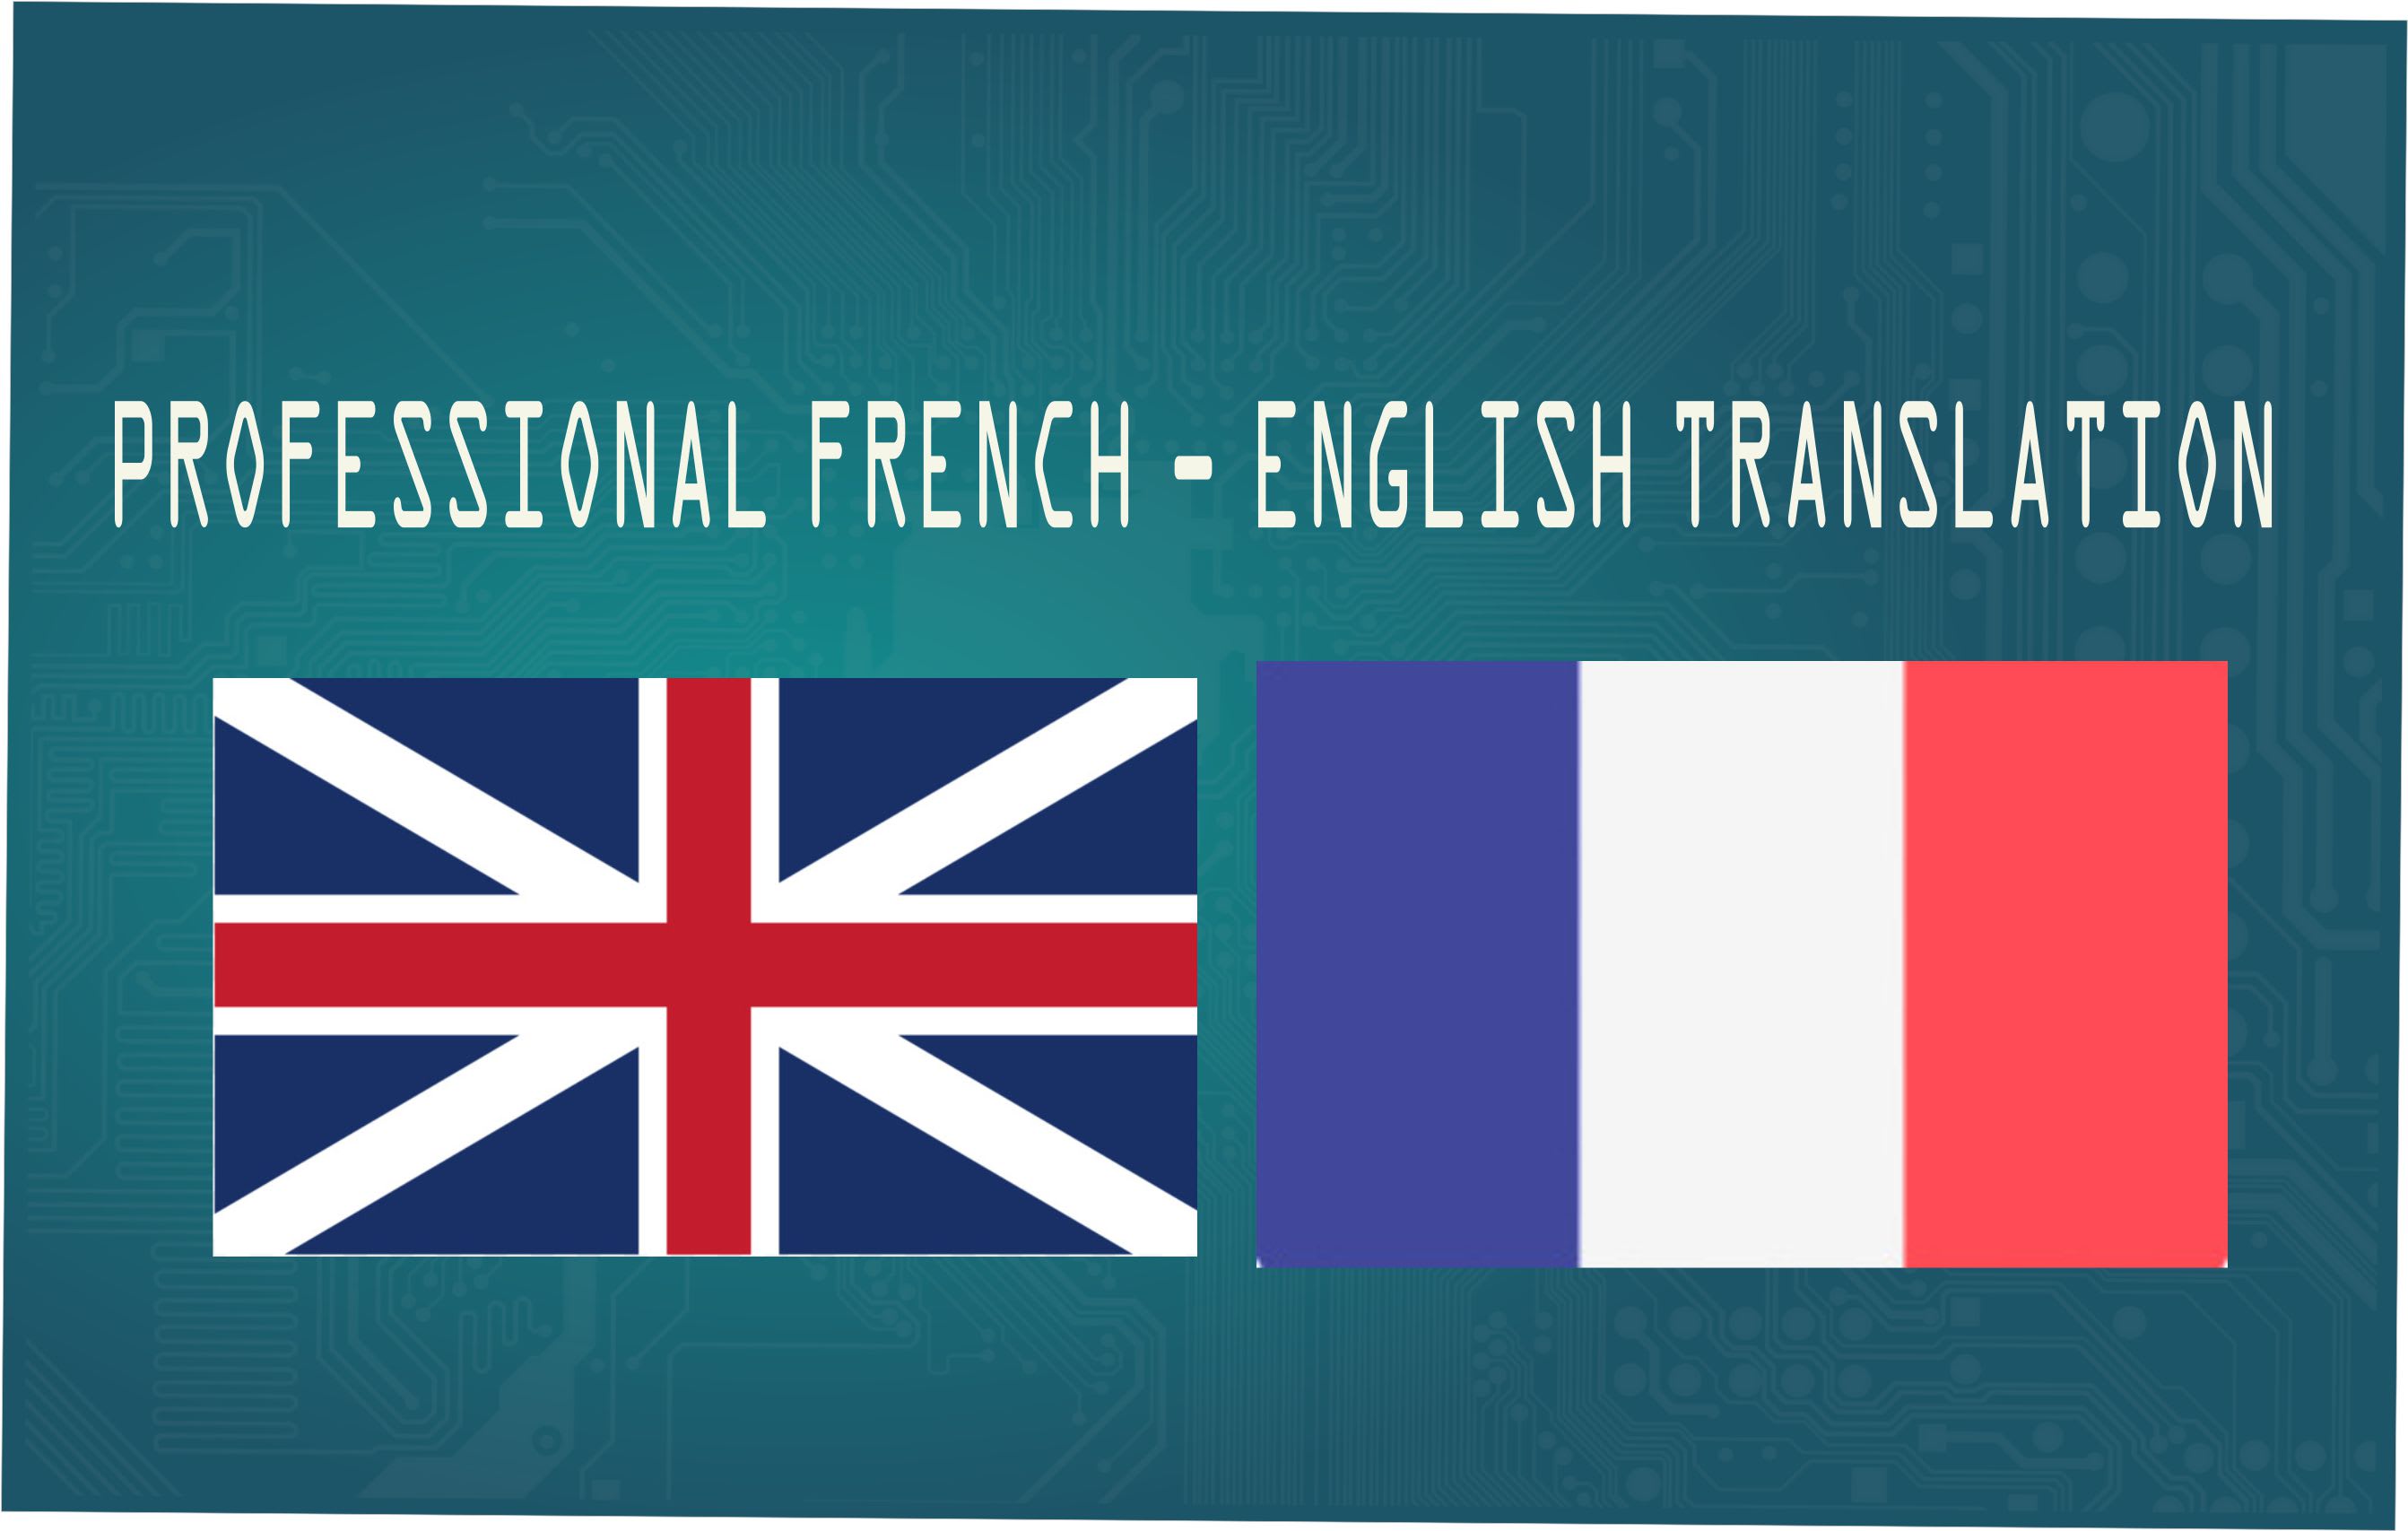 translate english to french